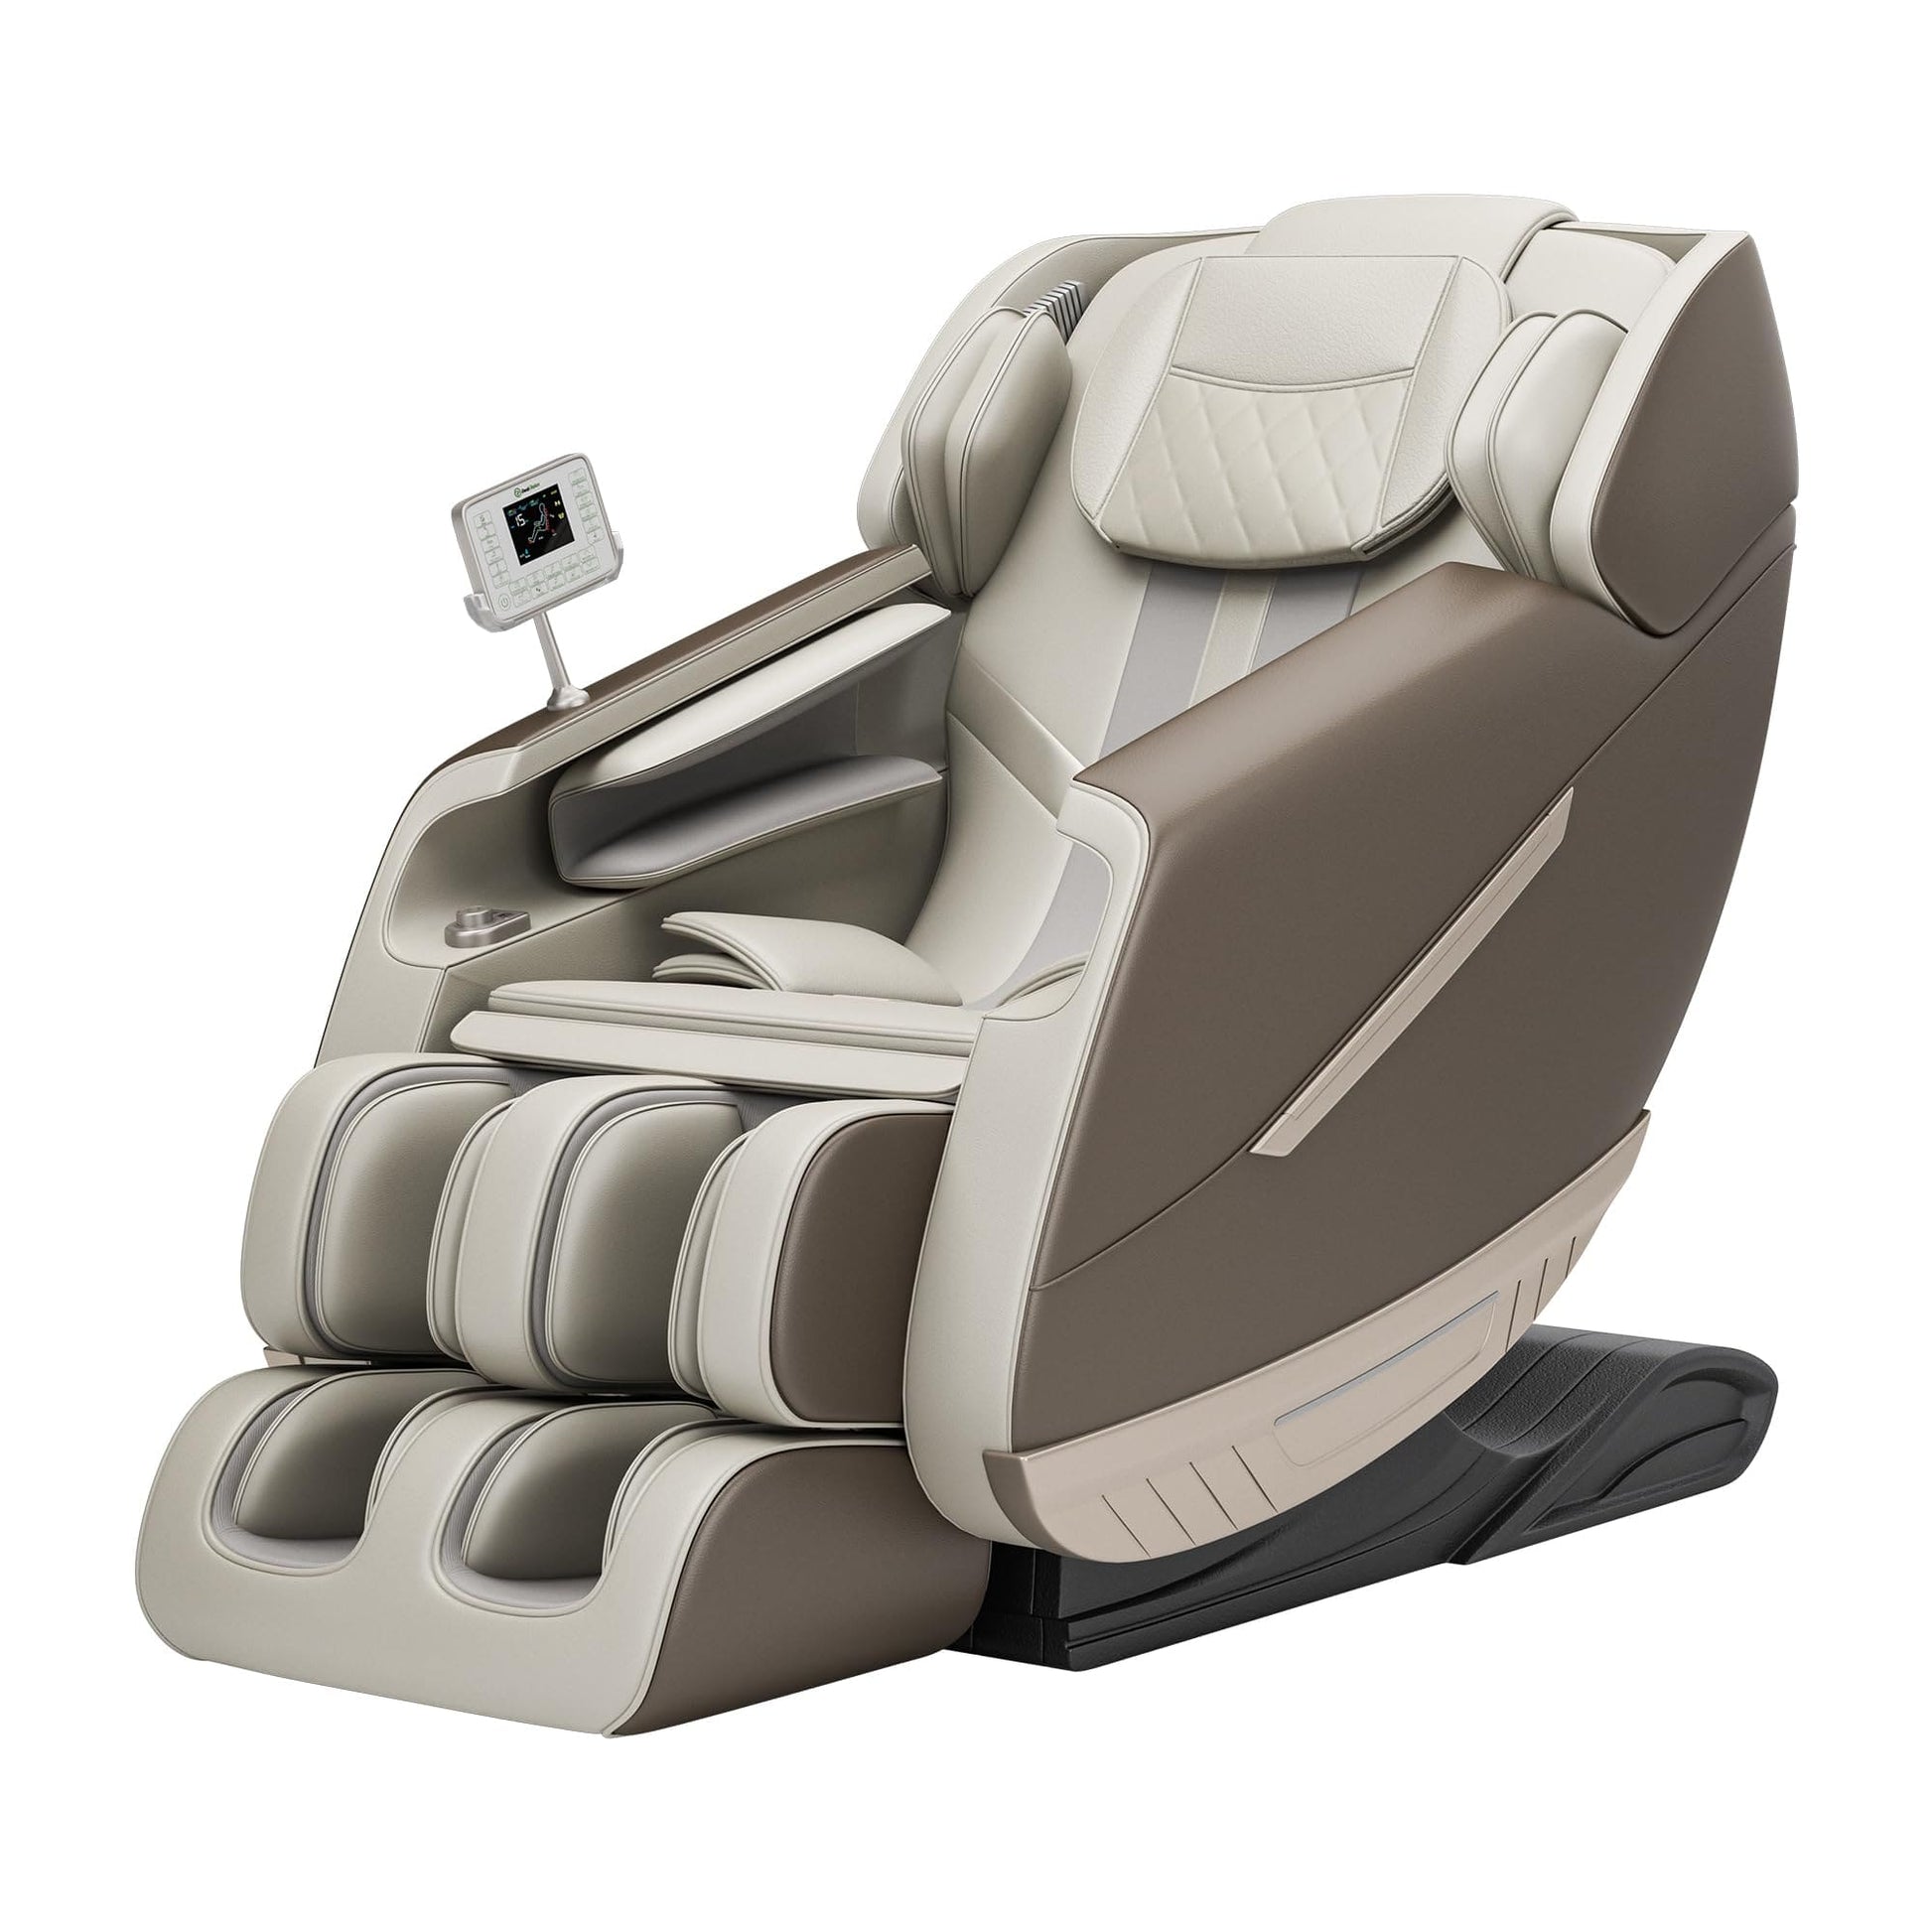 Real Relax Massage Chair PS3800 Massage Chair Brown